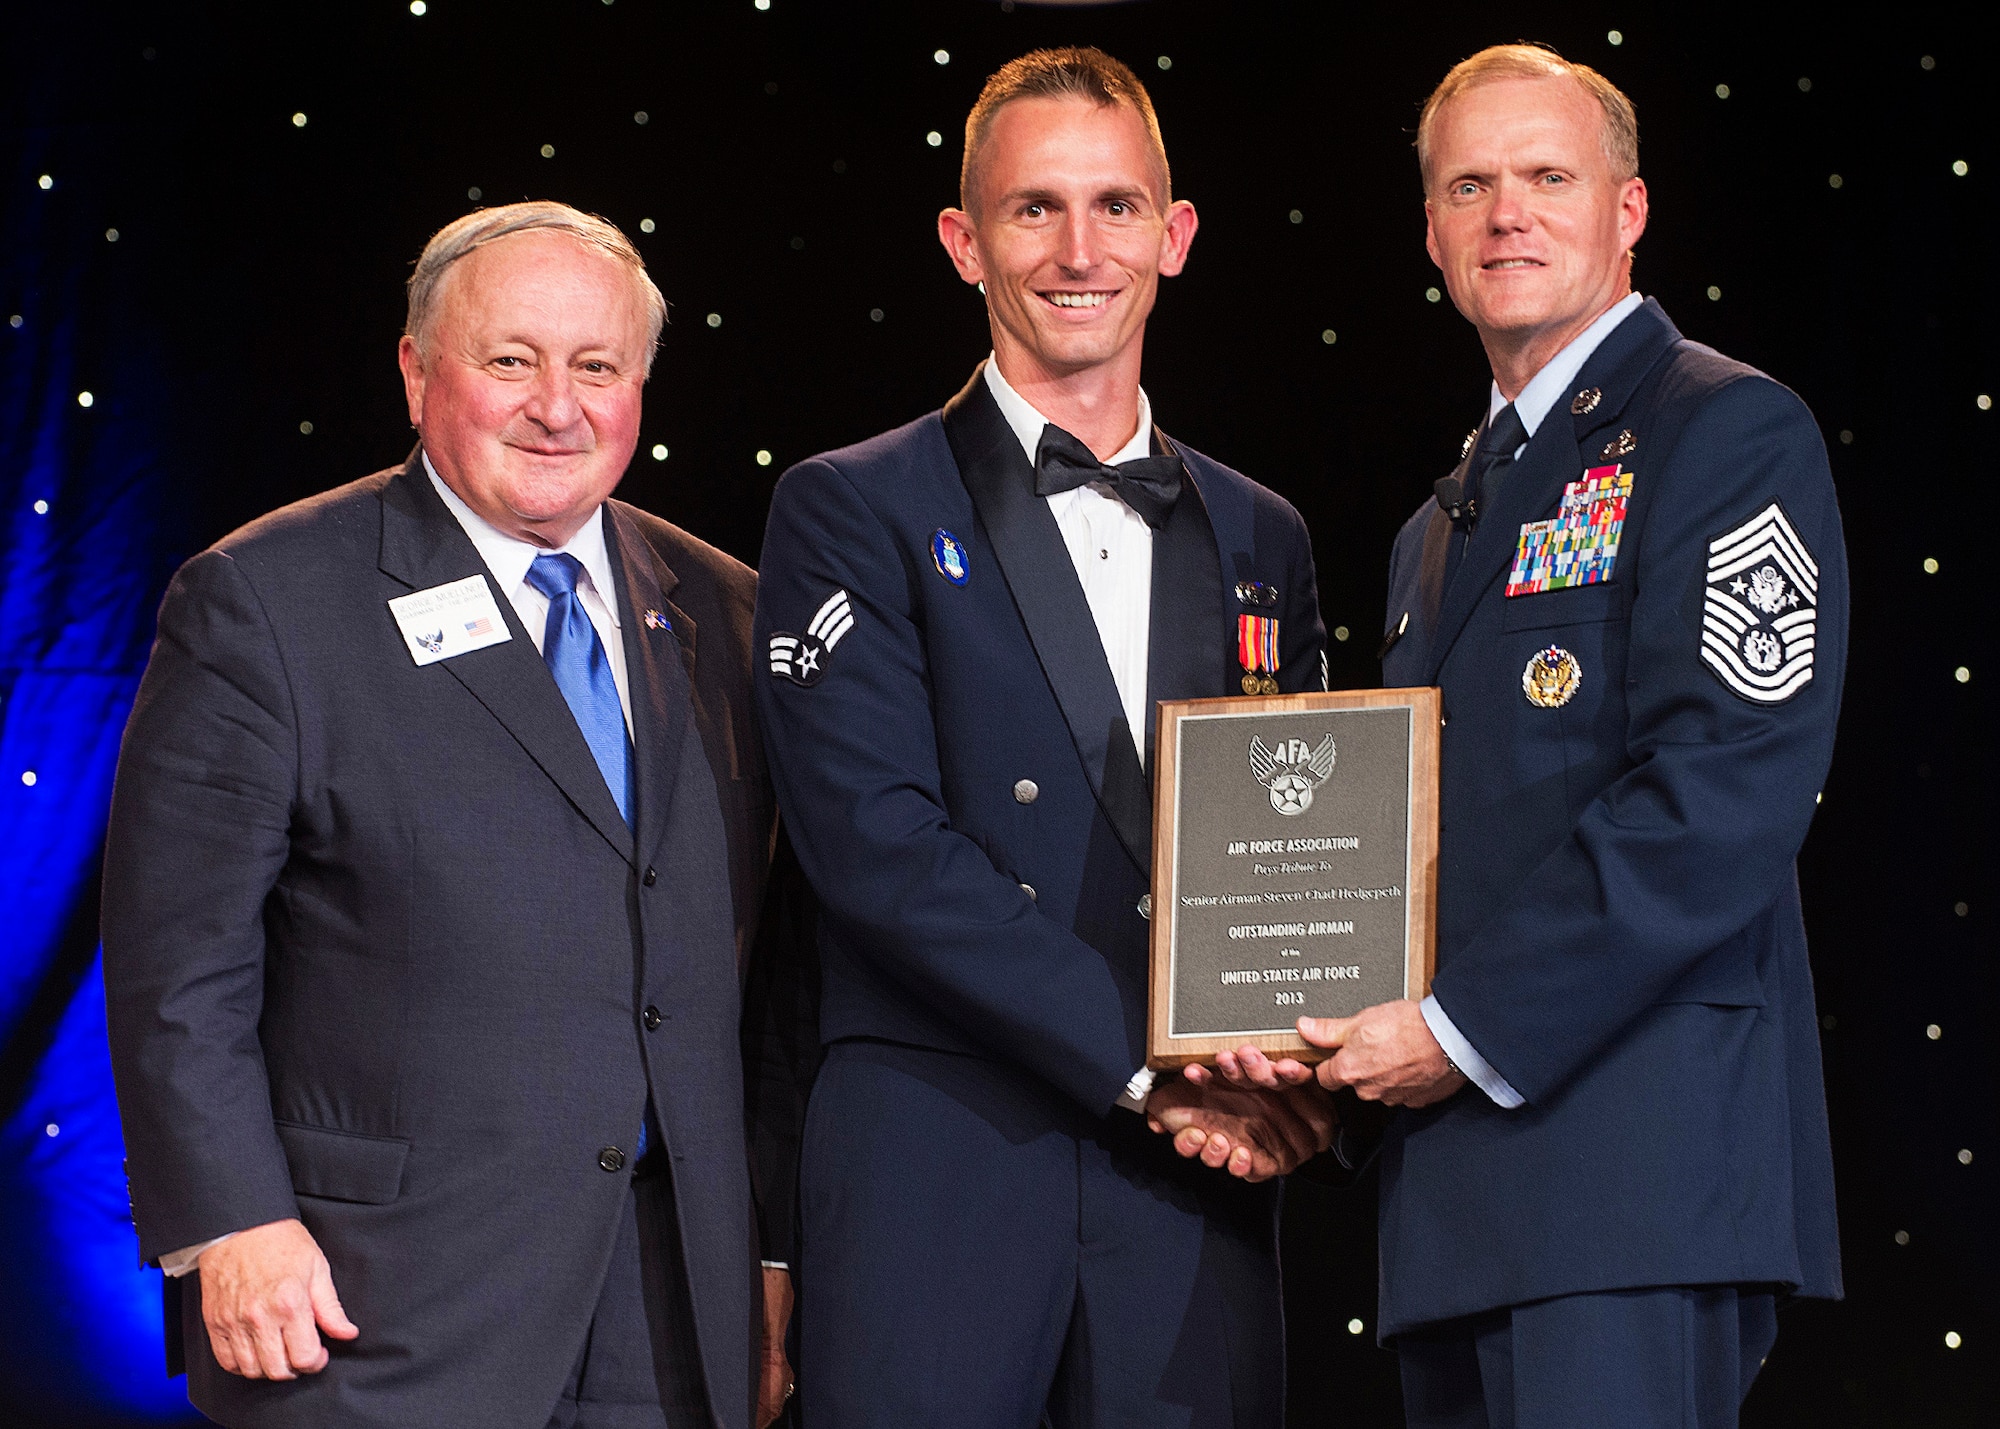 Senior Airman Steven Hedgepeth was recognized as one of the 12 Outstanding Airmen of a Year at a reception and awards dinner hosted by the Air Force Association during the AFA's annual Air & Space Conference and Technology Exposition Sept. 16, 2013, in Washington, D.C. The OAY award recognizes the top 12 outstanding enlisted Airmen for superior leadership, job performance, community involvement and personal achievements. Hedgepath is a contracting specialist with the 772nd Enterprise Sourcing Squadron at Joint Base San Antonio-Lackland, Texas.  (U.S. Air Force photo/Jim Varhegyi)